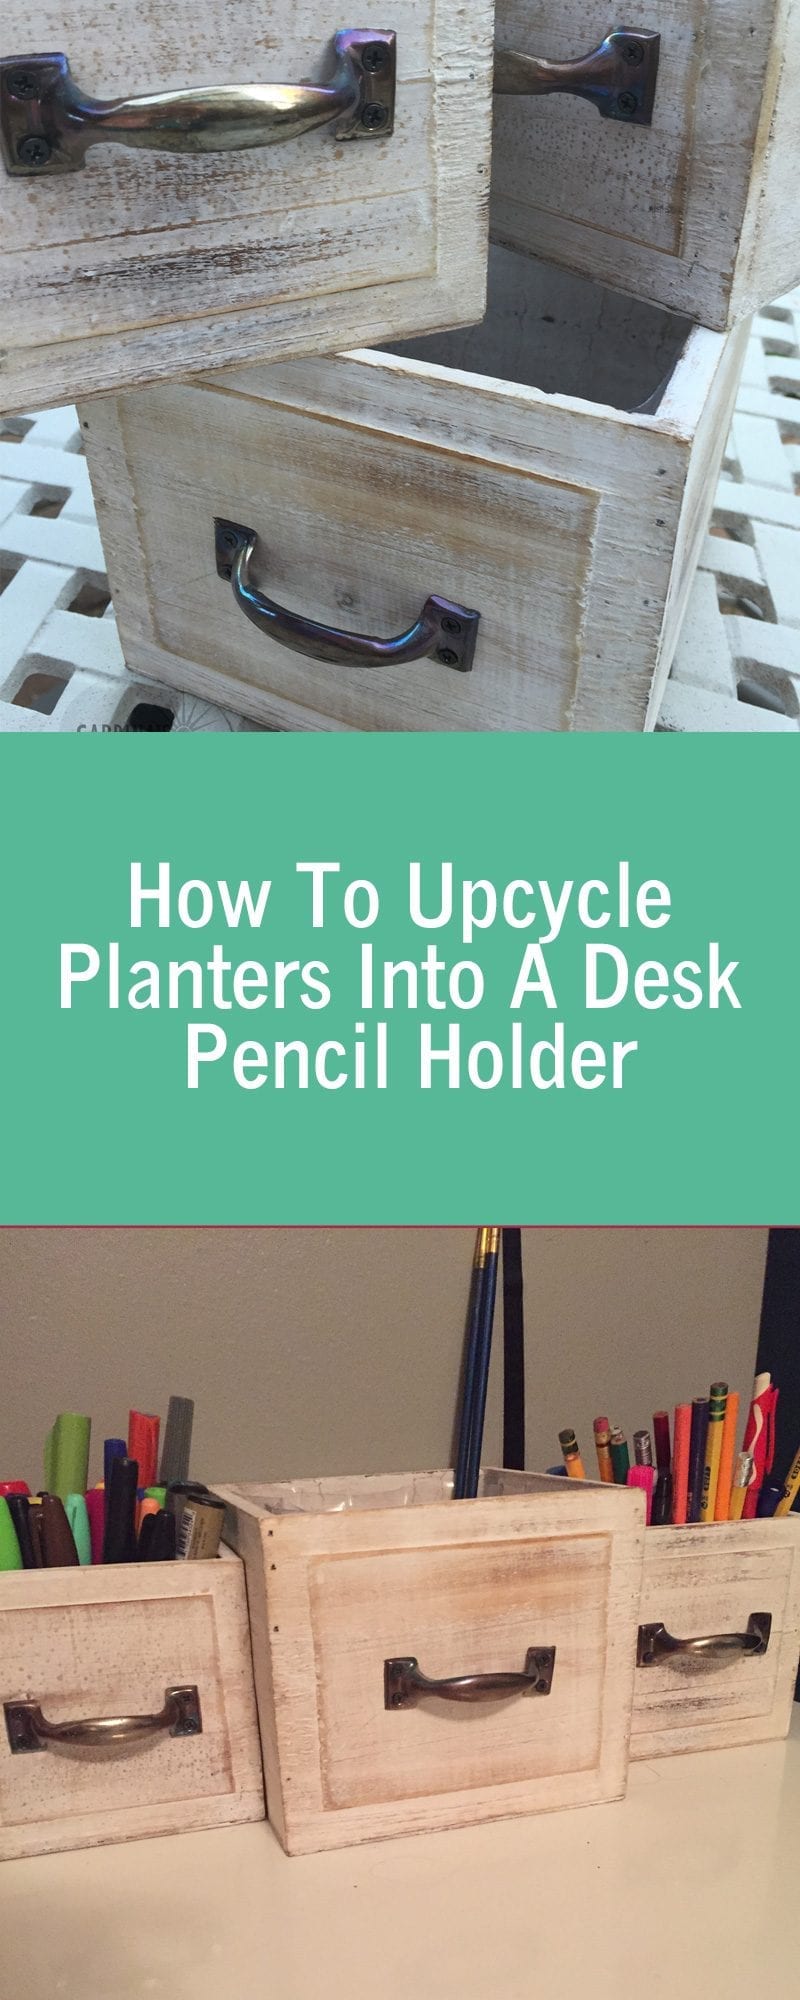 How To Upcycle Planters Into A Desk Pencil Holder